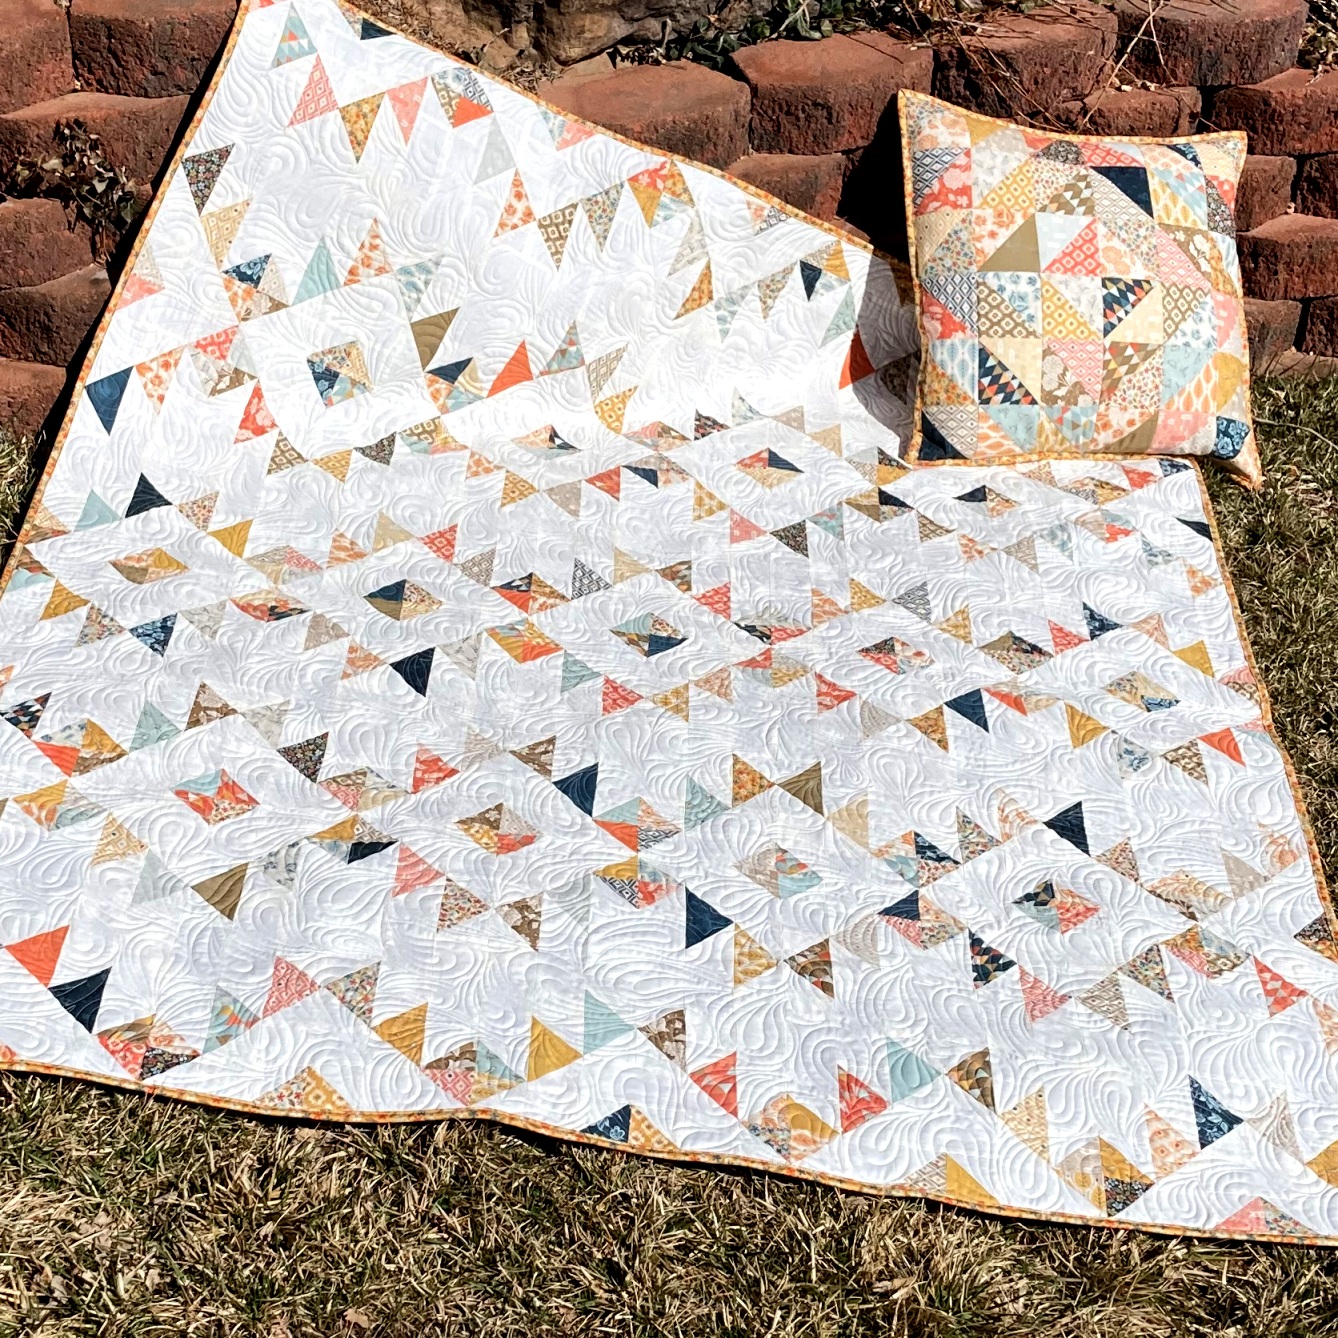 10 Easy Quilt Patterns for Beginners Story - Tidbits